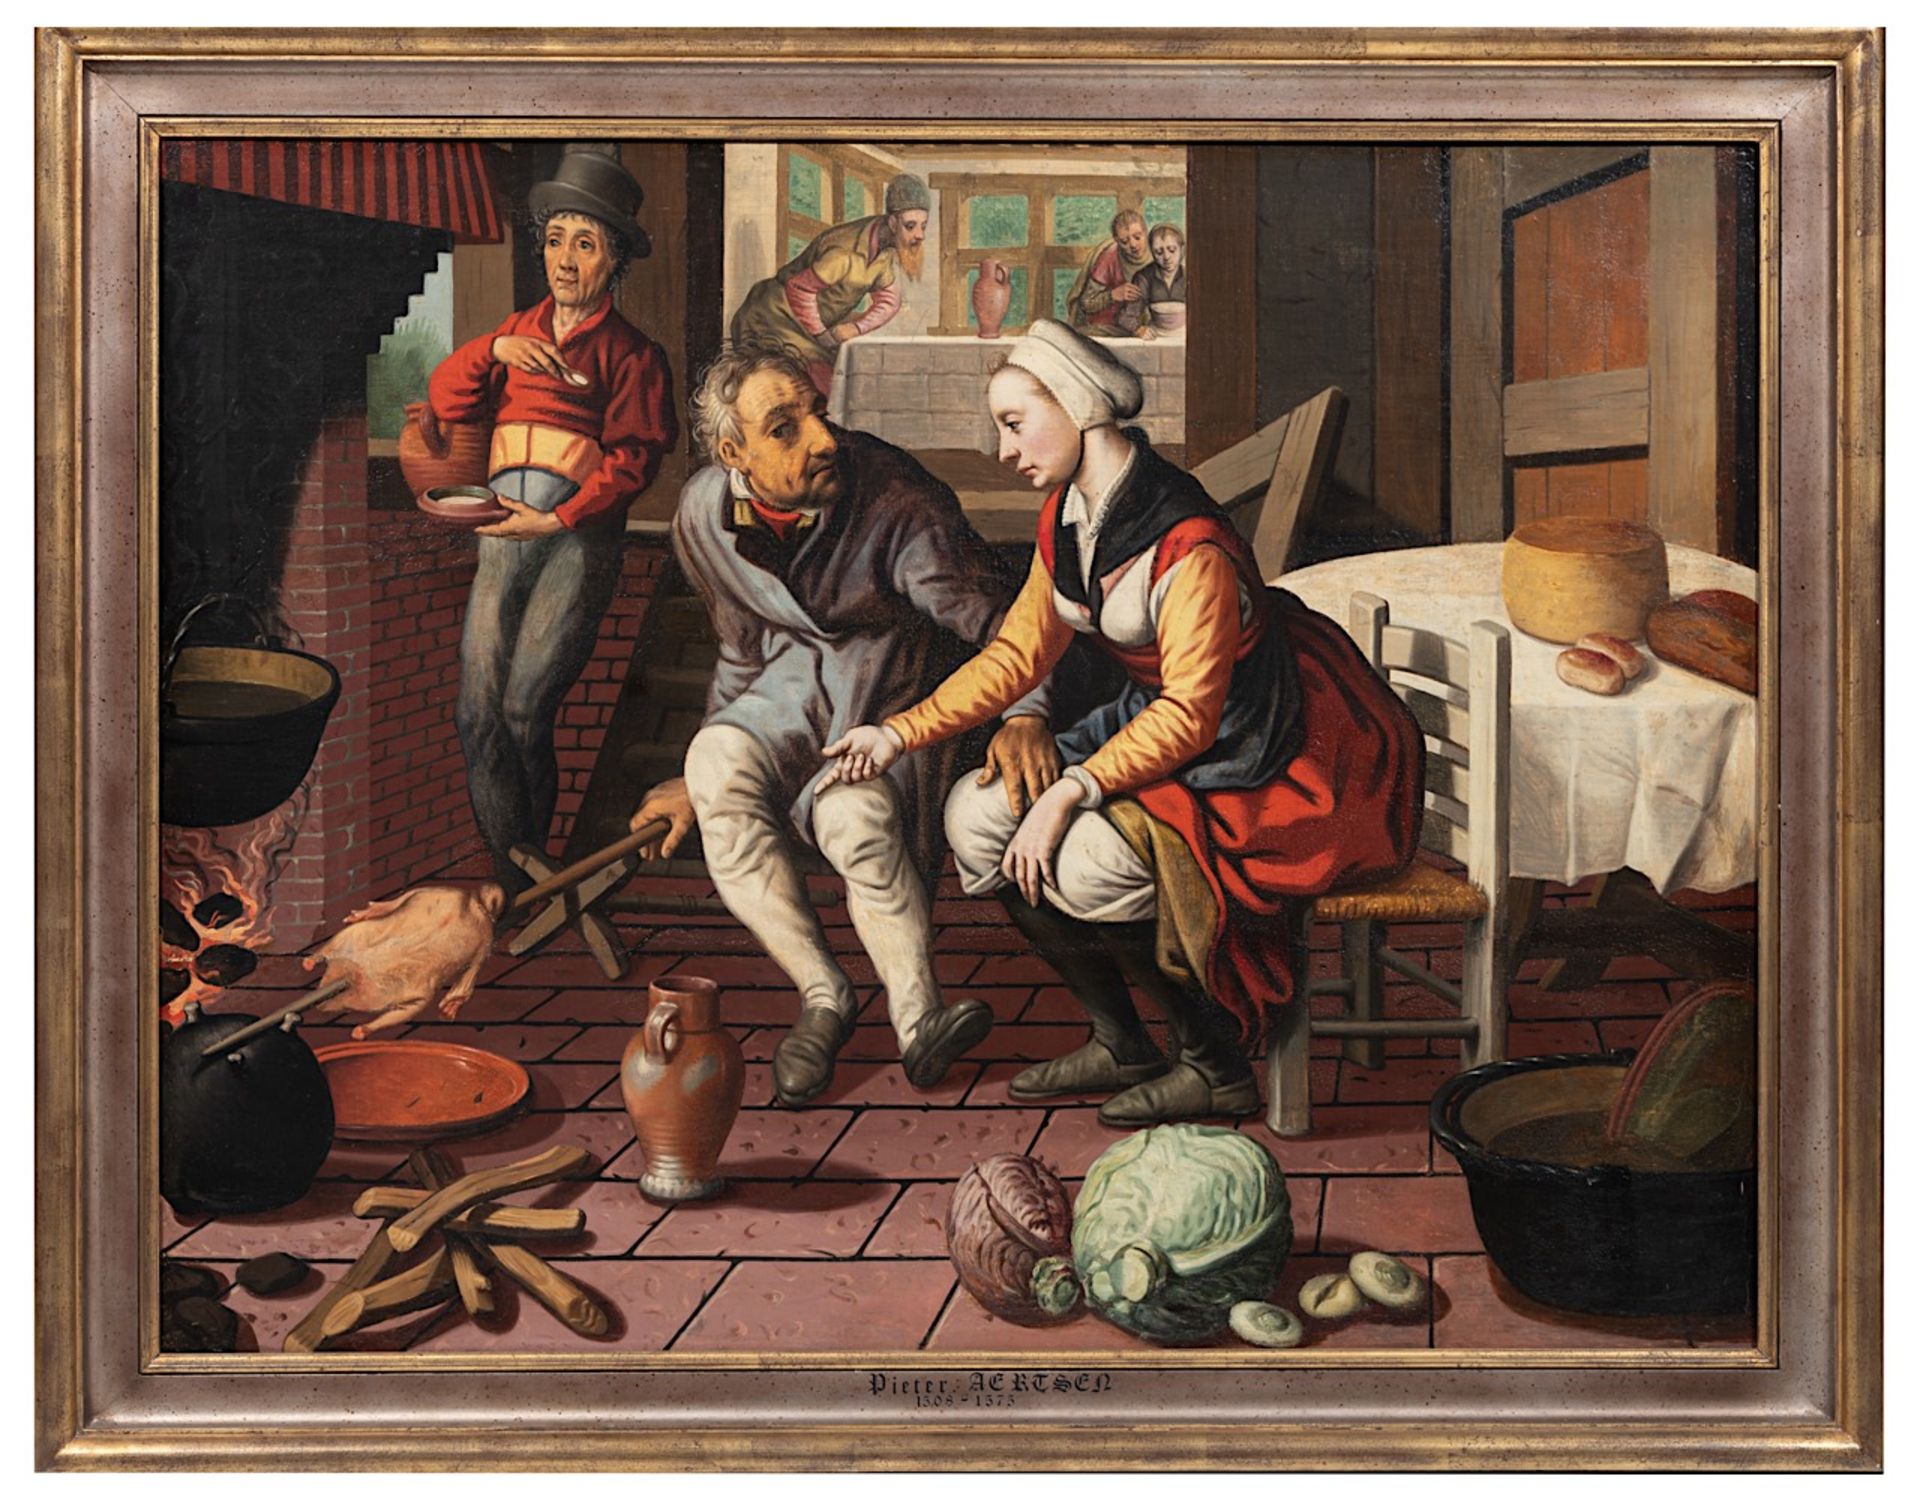 Attrib. to Pieter Aertsen (1507/08-1575), kitchenmaid and customers in a hostel, oil on canvas 81 x - Image 2 of 6